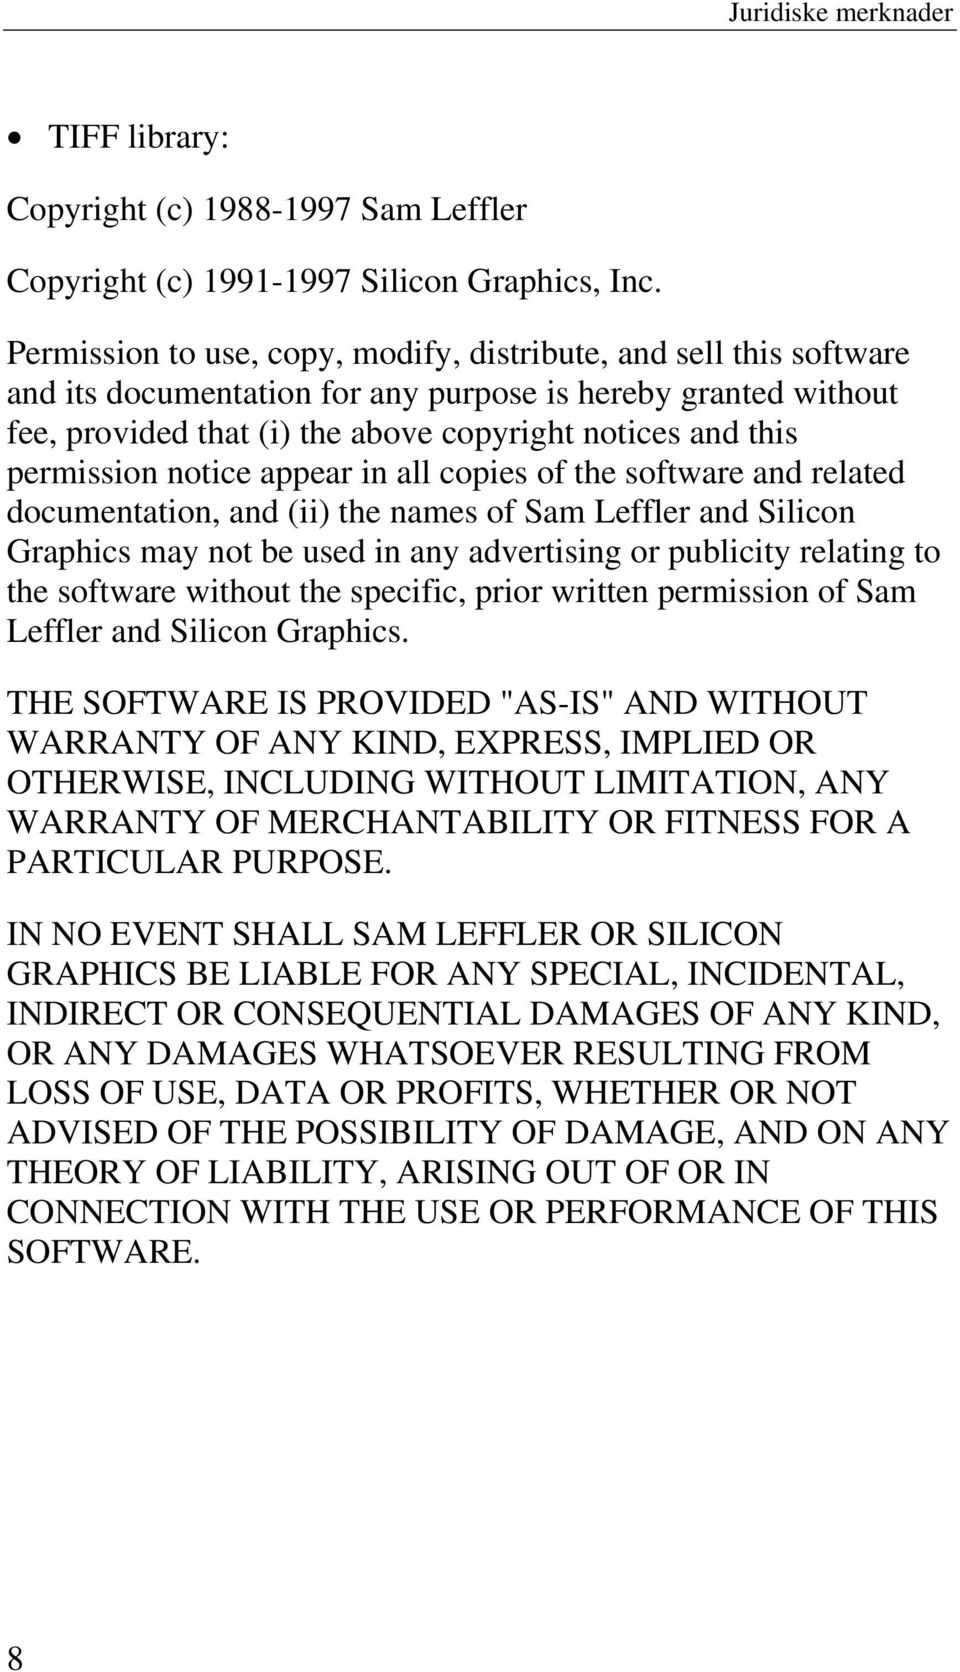 permission notice appear in all copies of the software and related documentation, and (ii) the names of Sam Leffler and Silicon Graphics may not be used in any advertising or publicity relating to